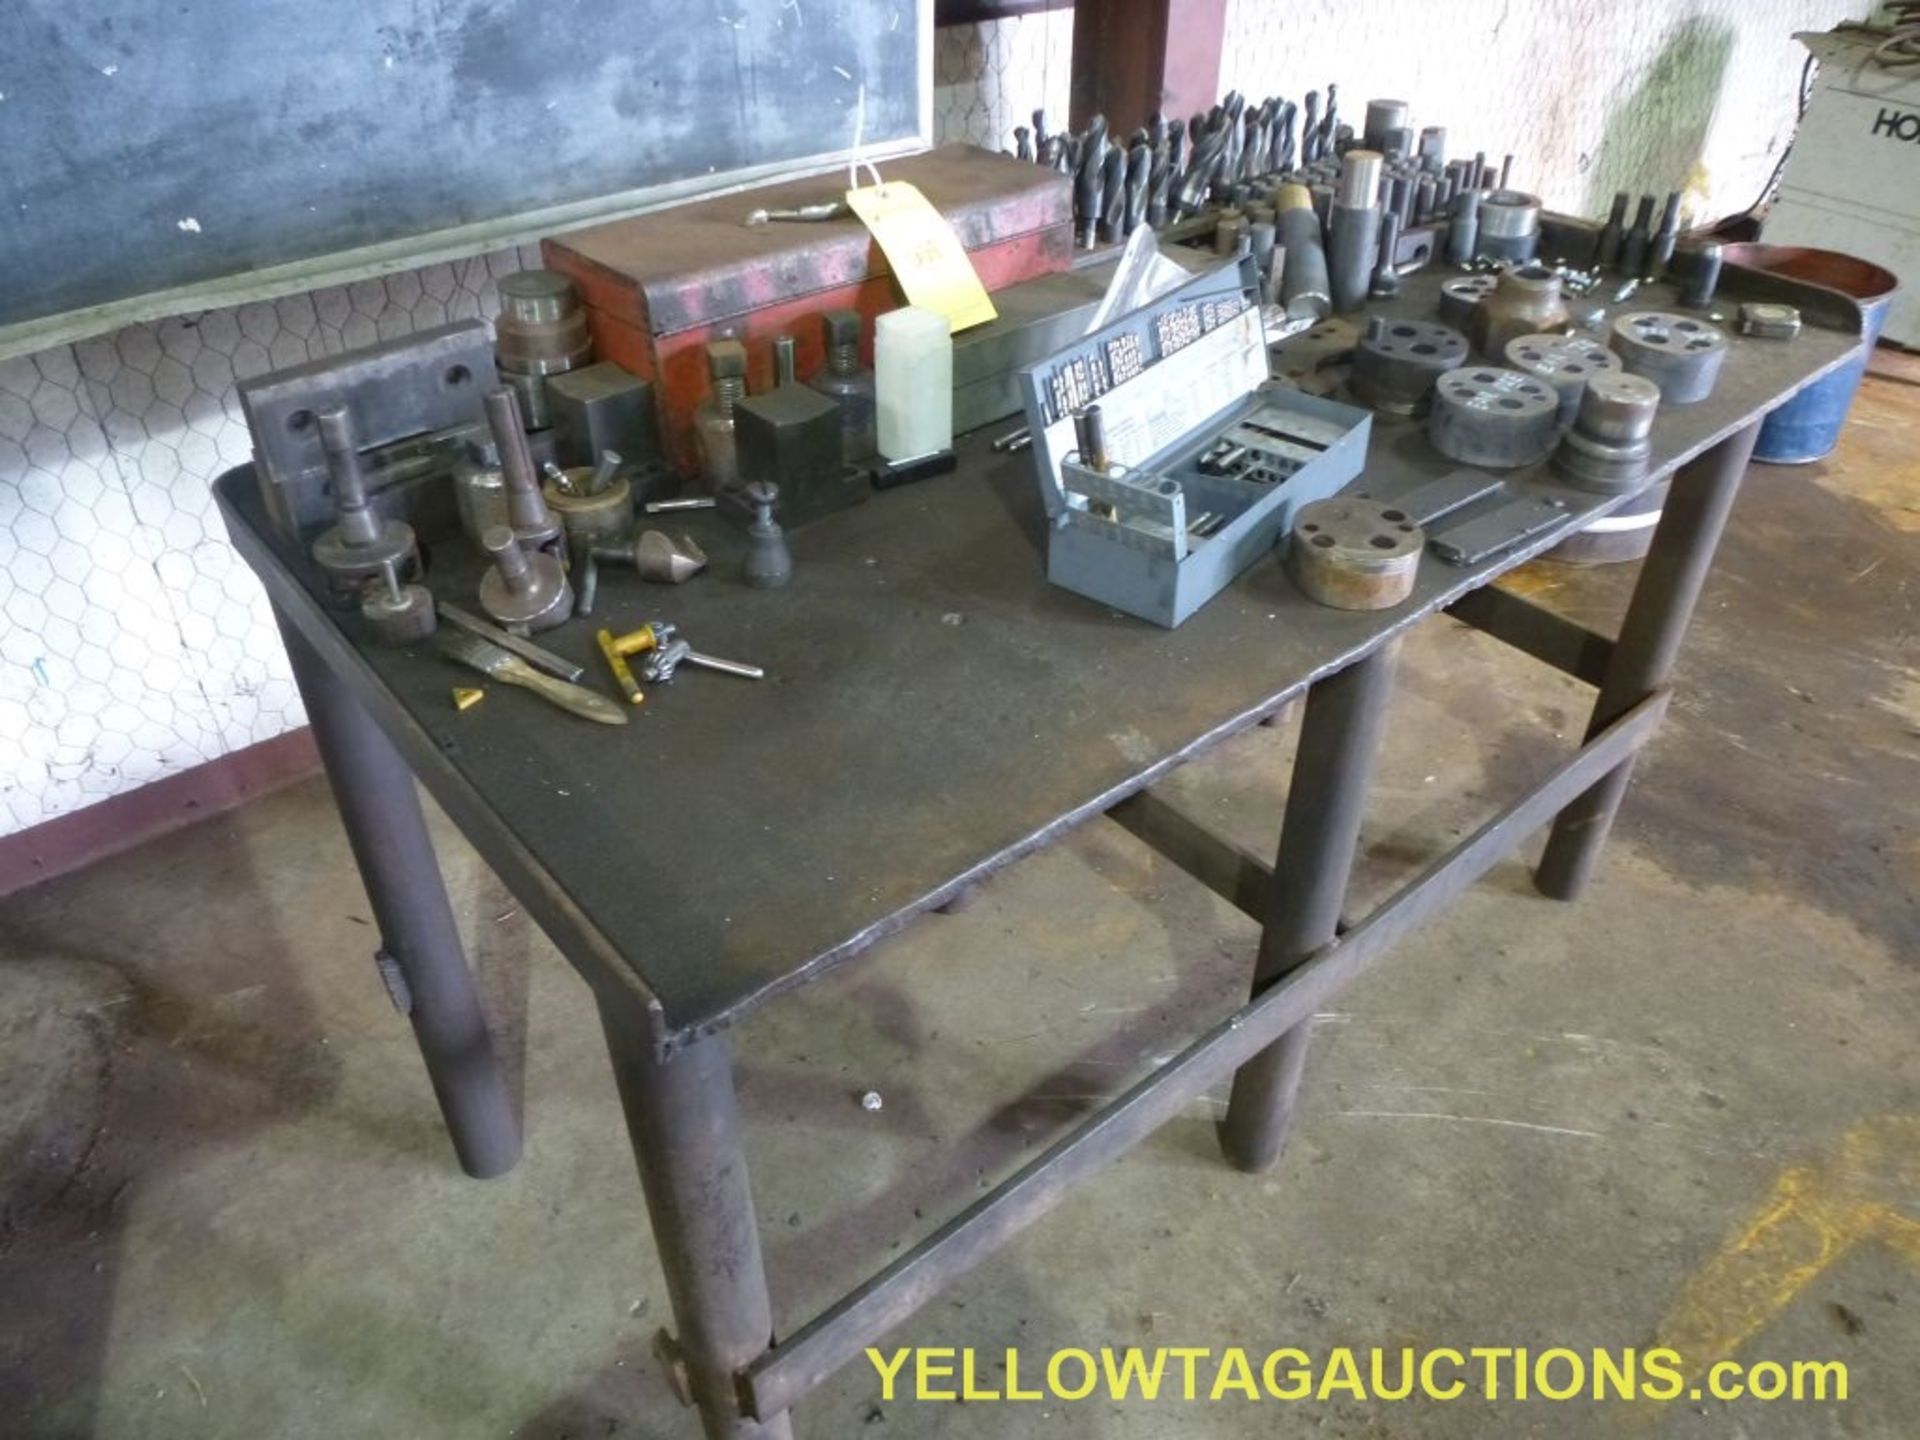 Metal Work Table with Contents|Includes: Drill Bits, Dies|Tag: 668 - Image 2 of 19